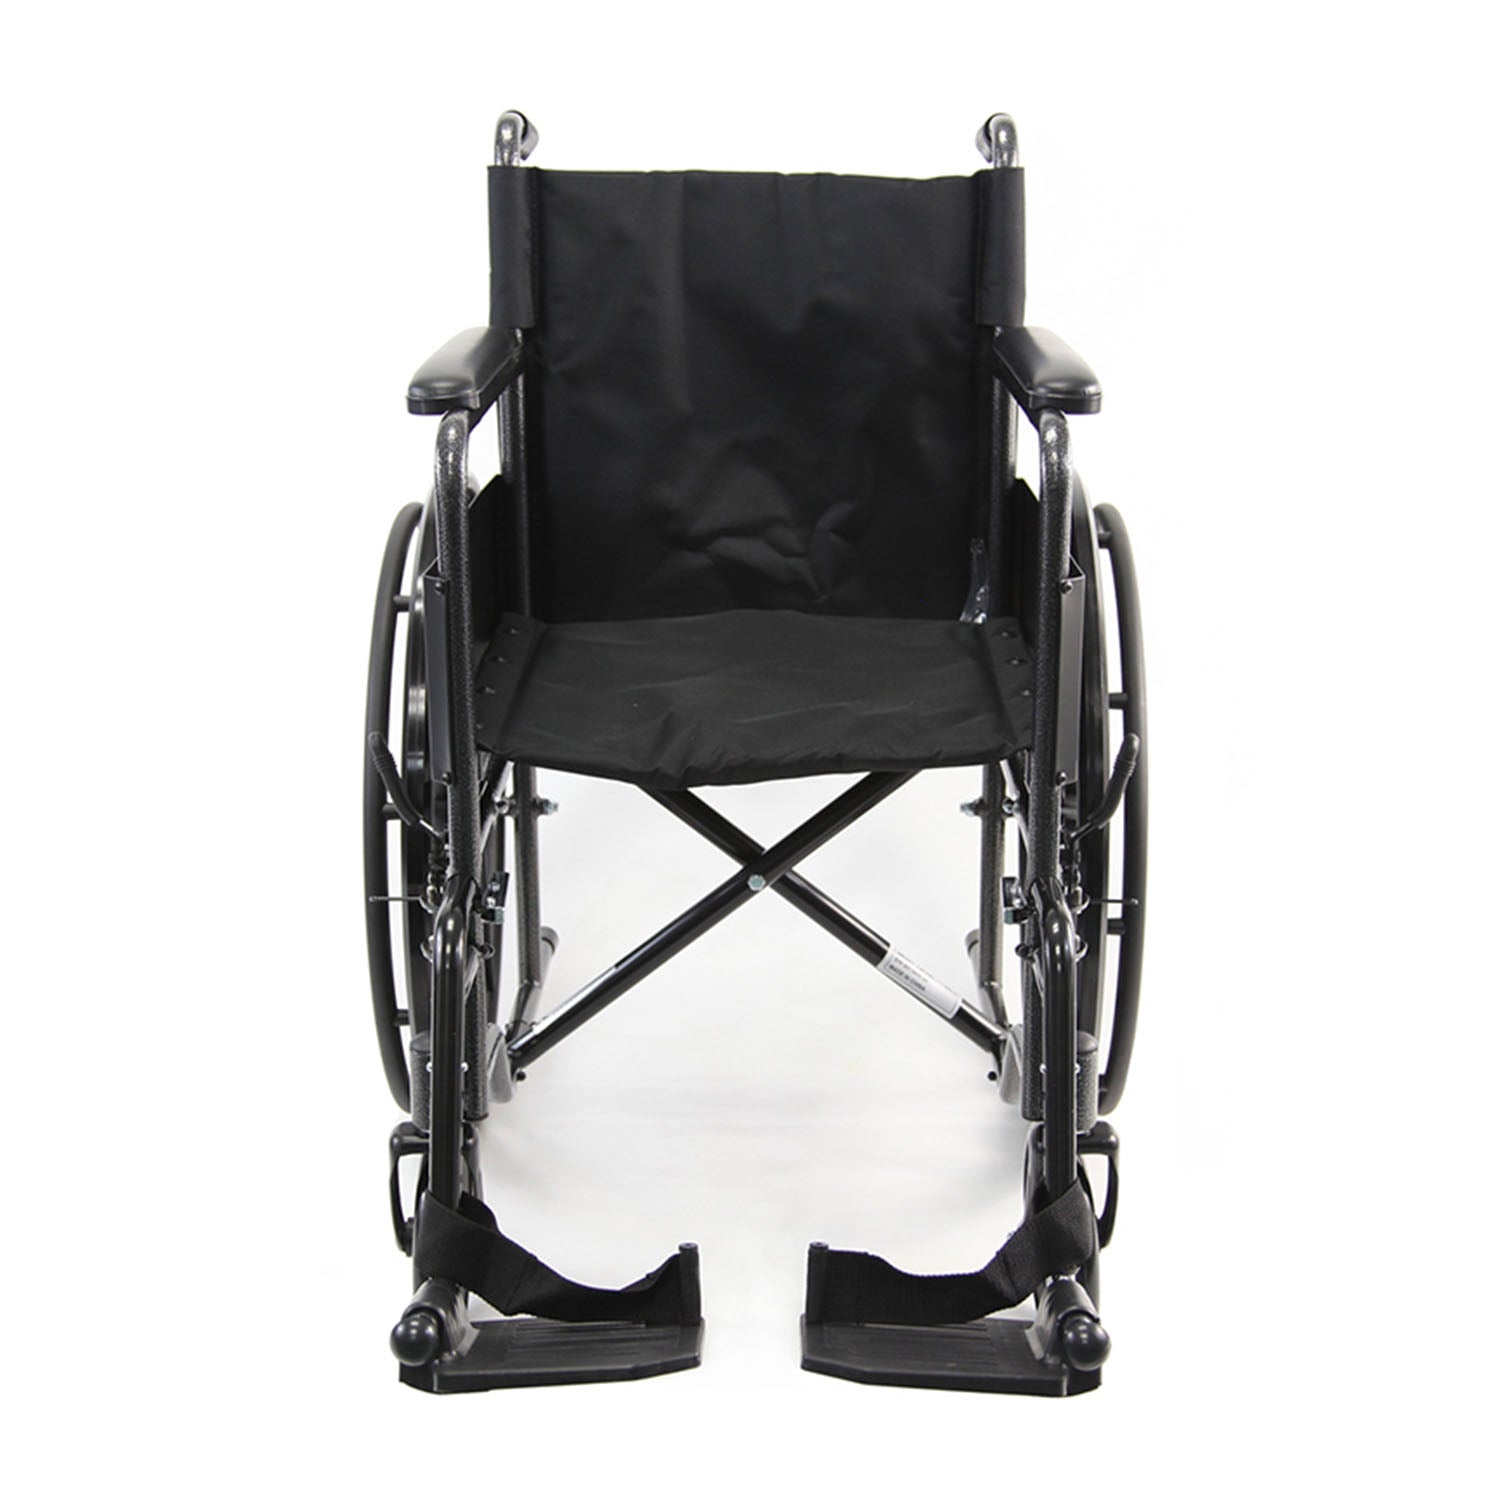 Karman LT-800T 18 inch Seat 34 lbs. Lightweight Steel Wheelchair with Fixed Armrest